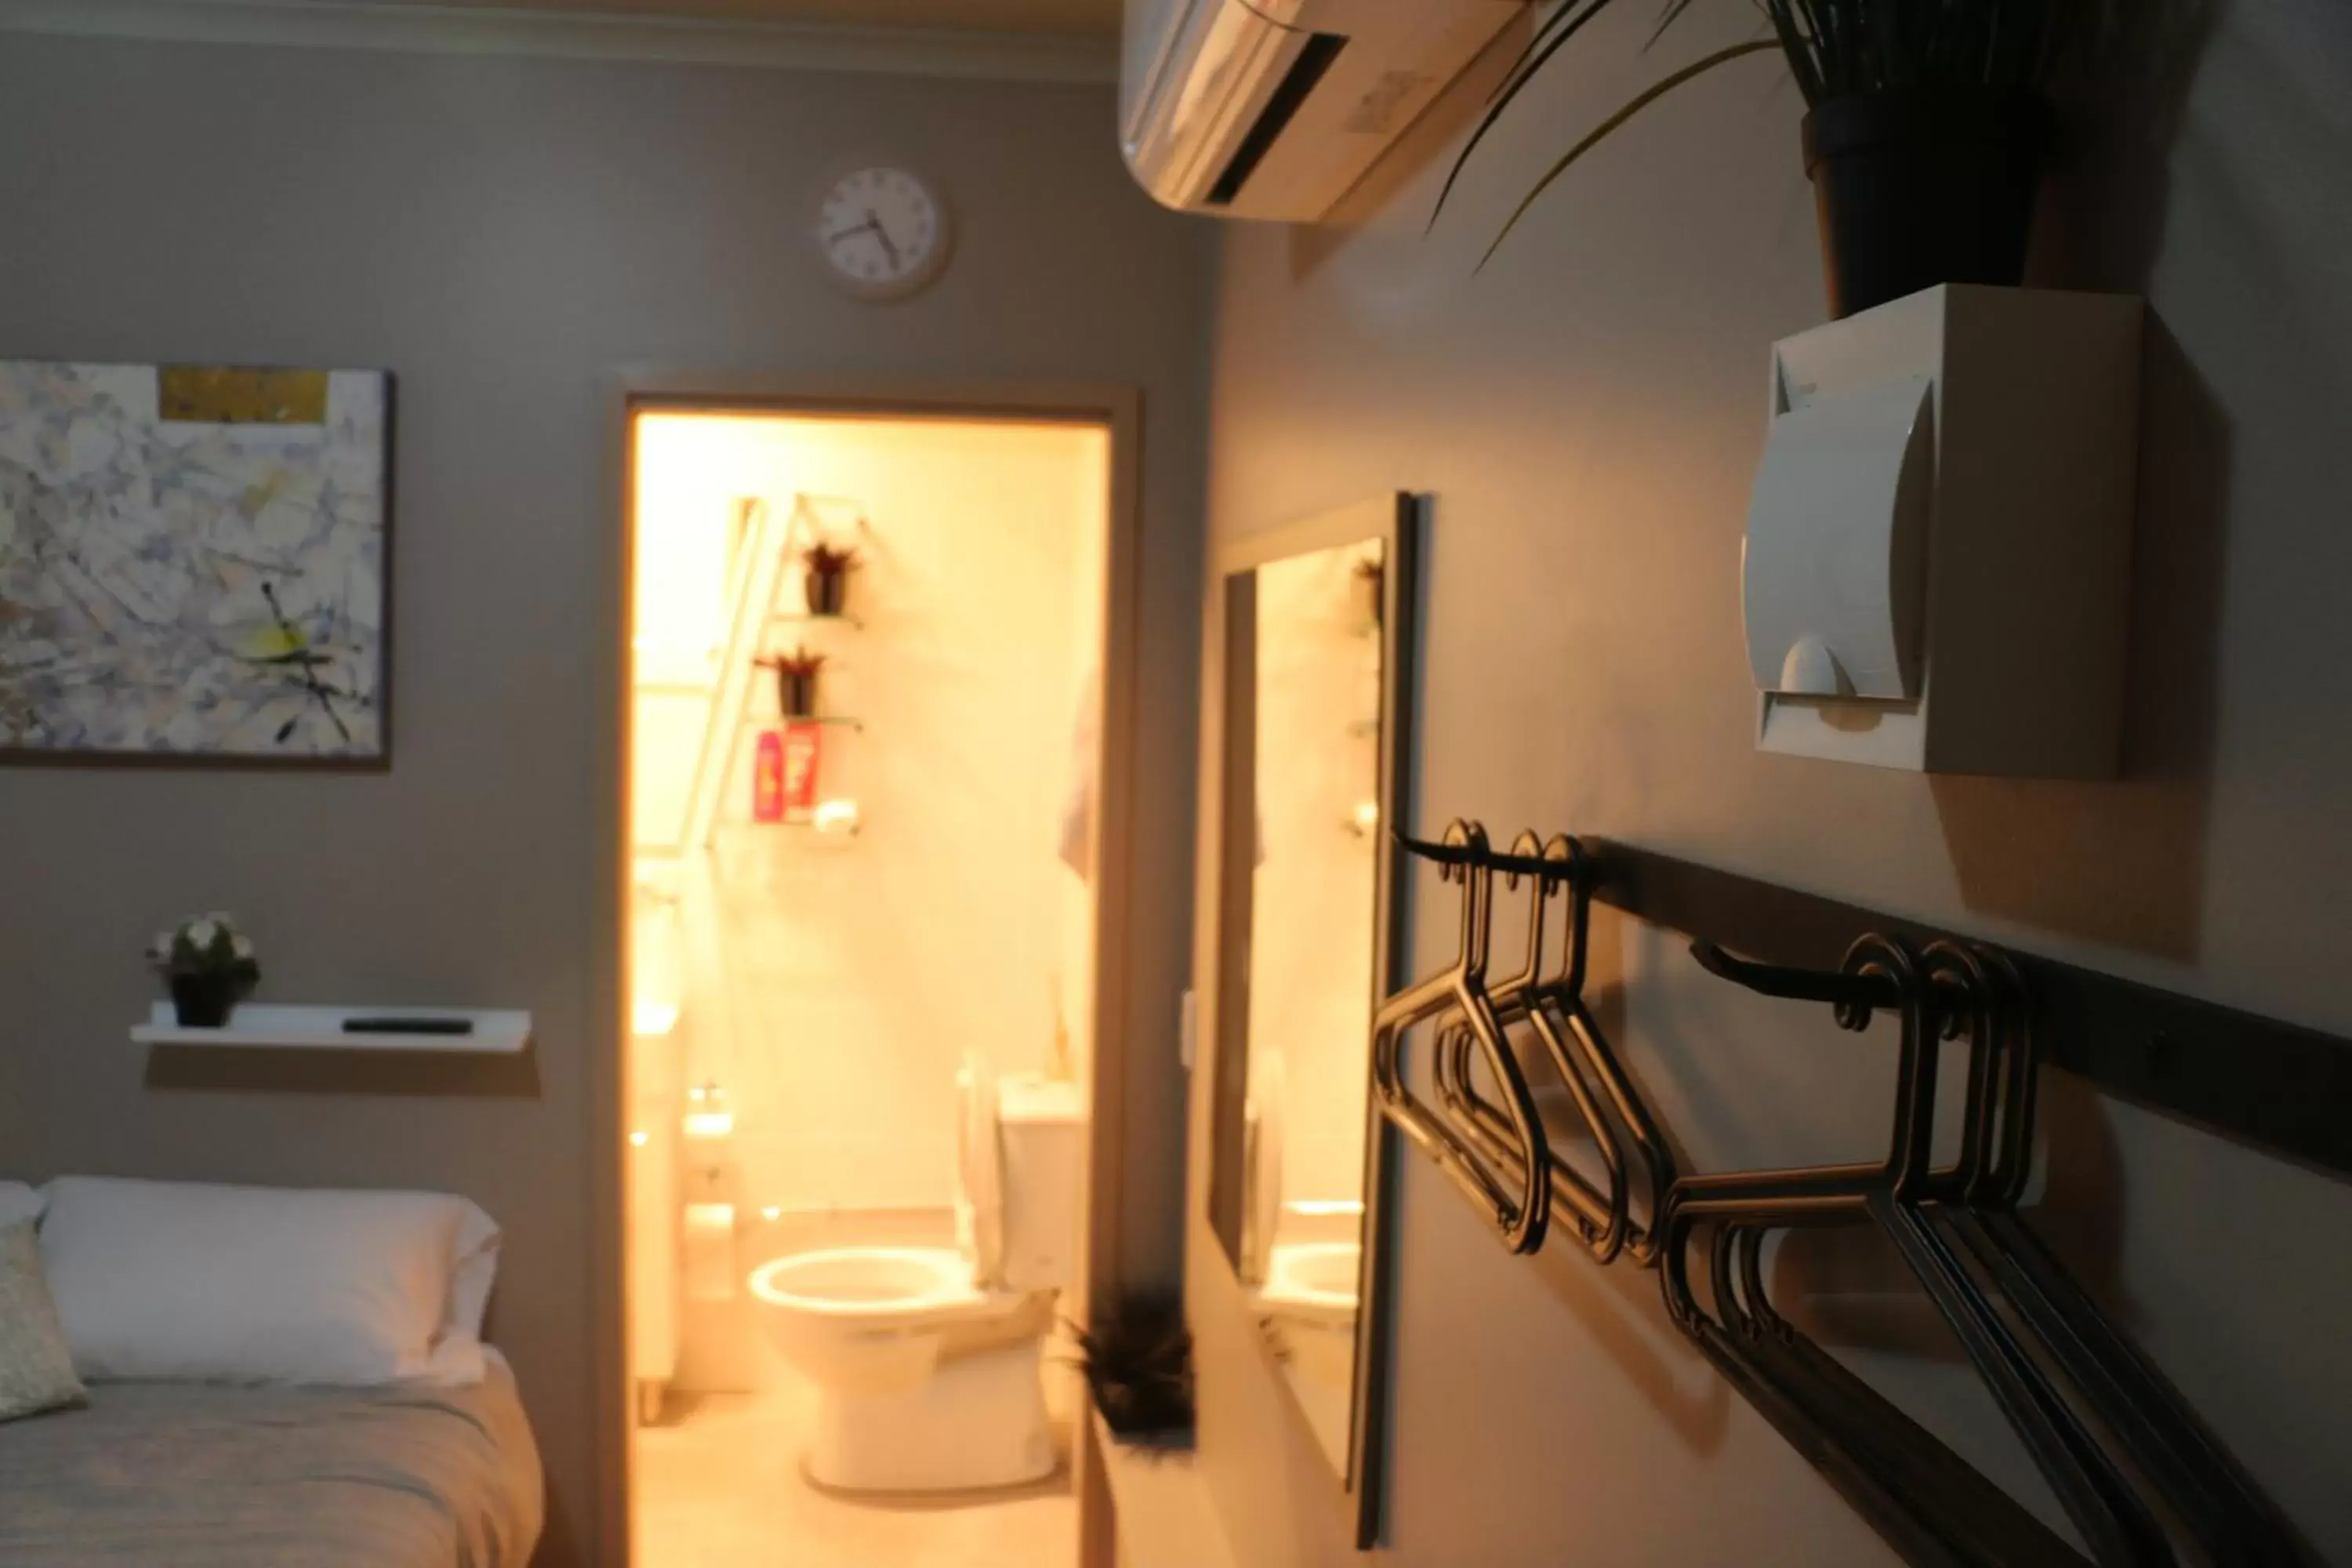 Area and facilities in Westside Studio Apartments